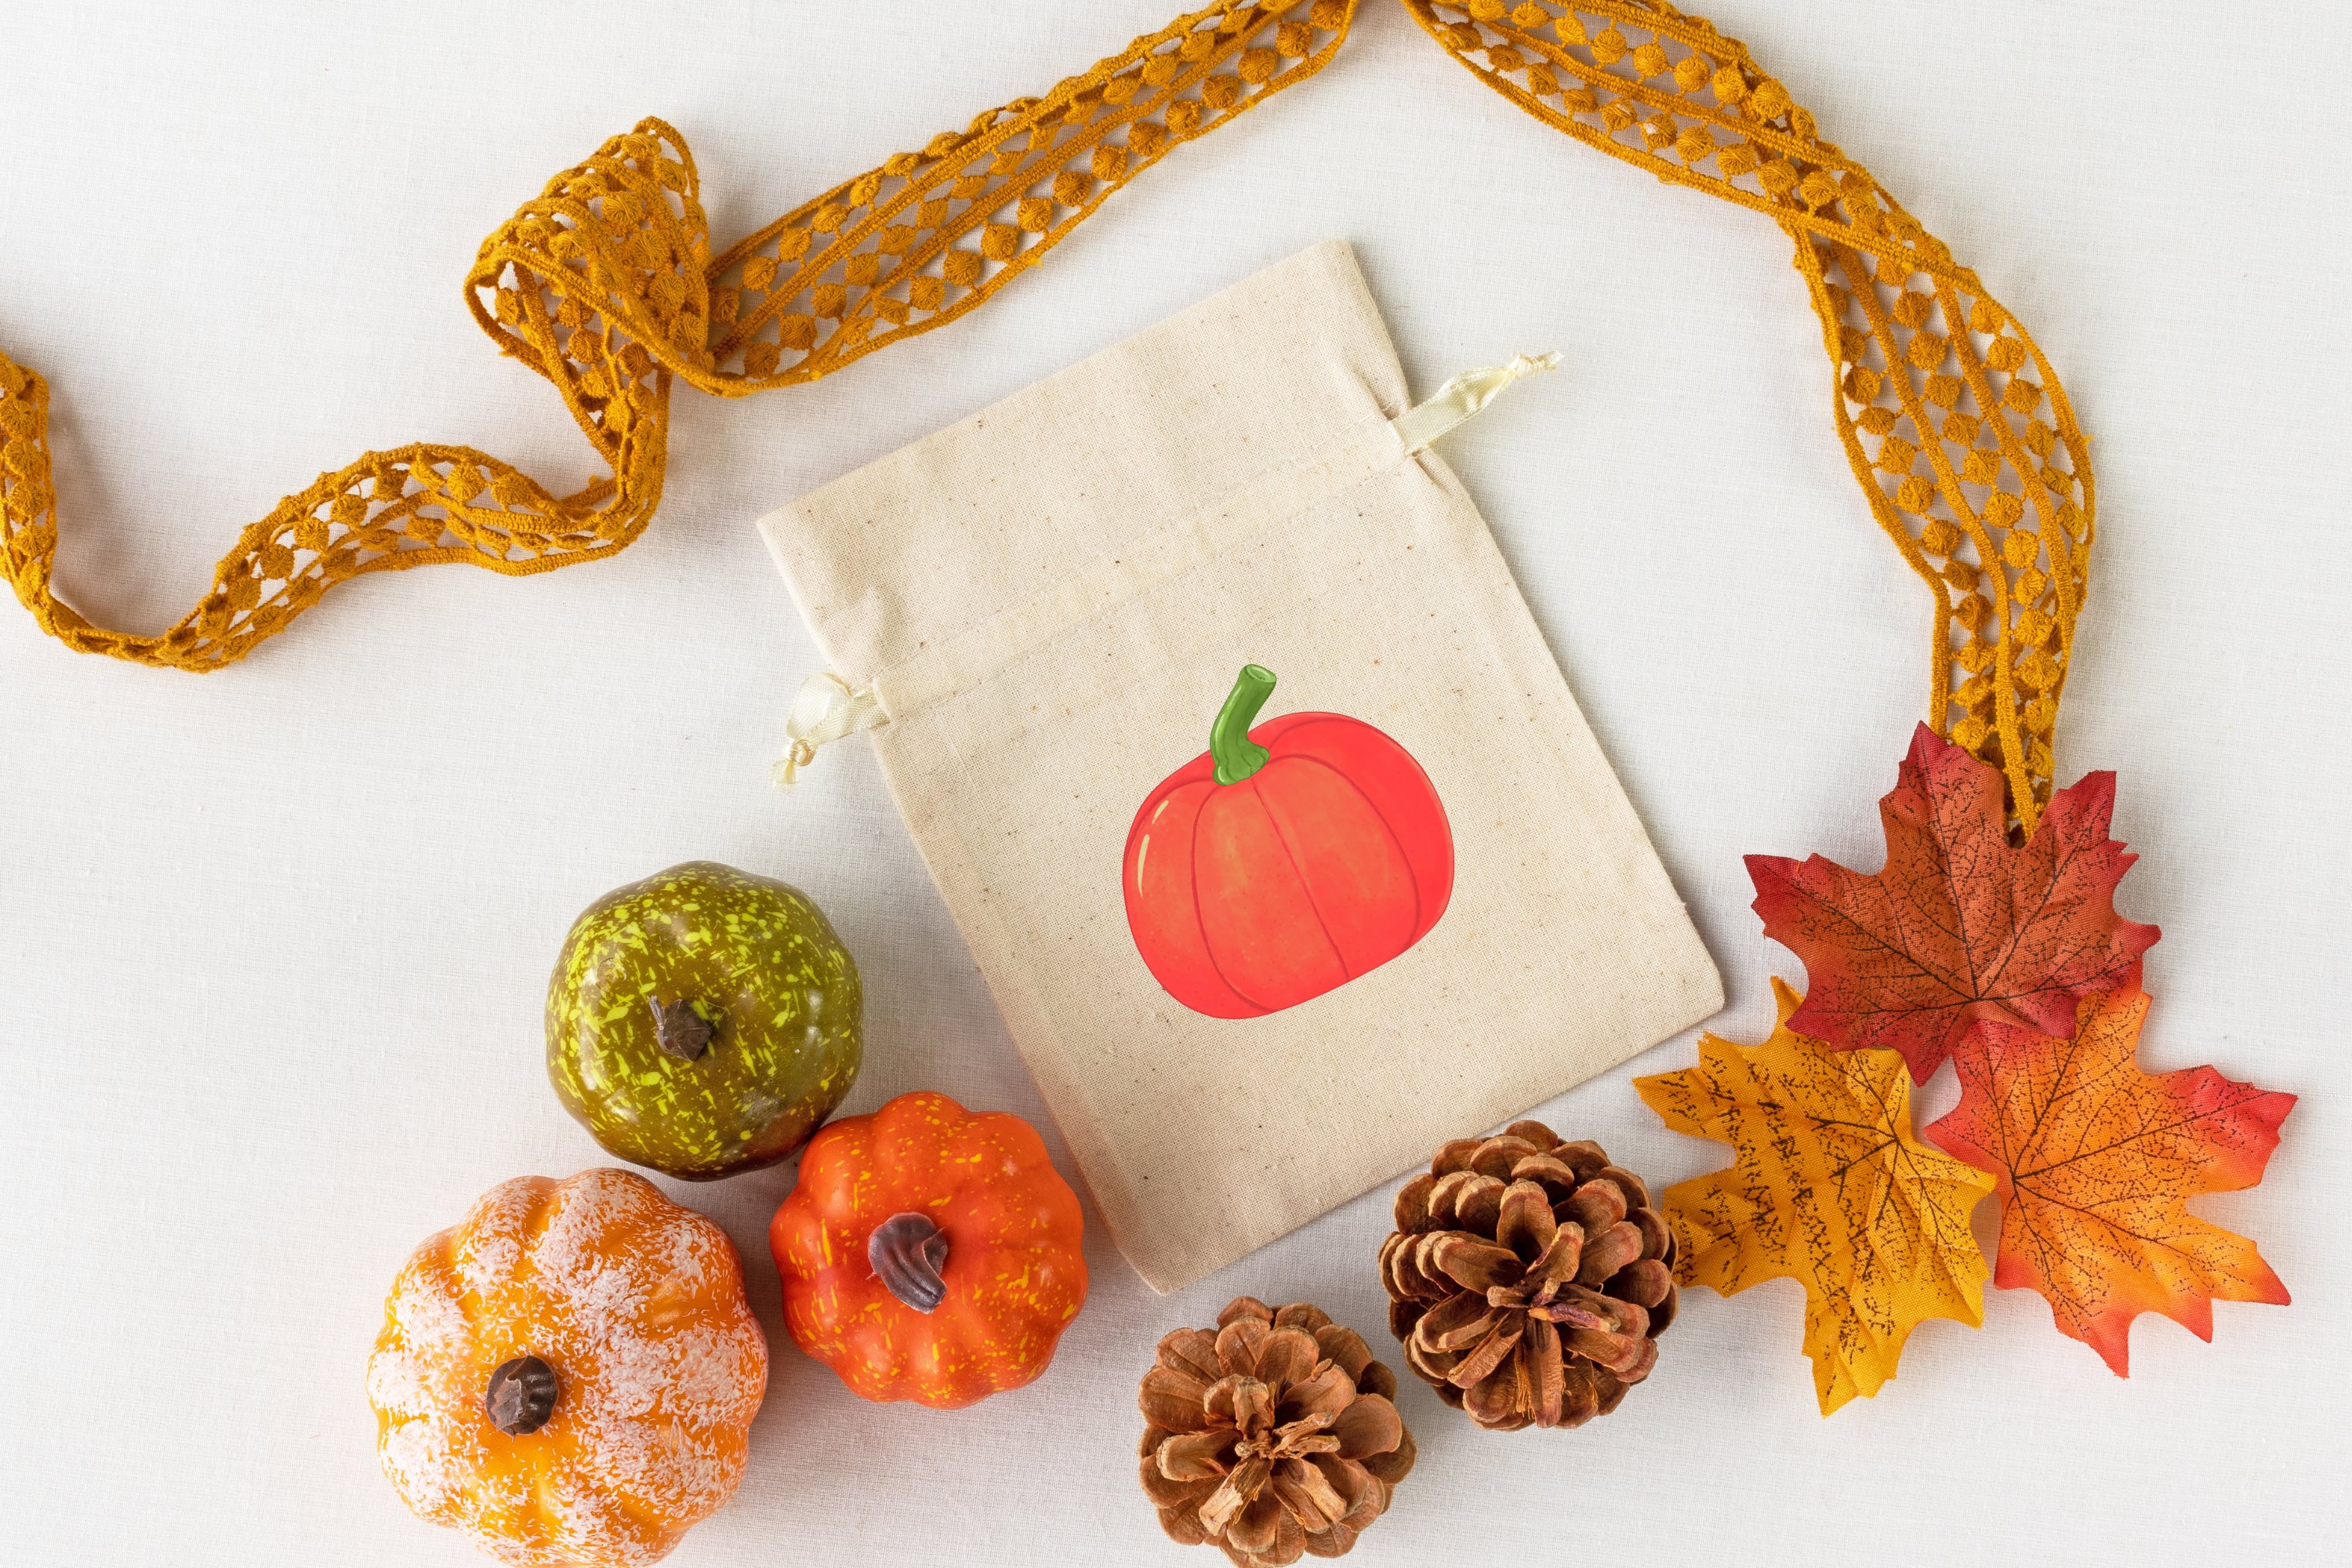 Beige bag with illustration of pumpkin on a gray background with pumkins.